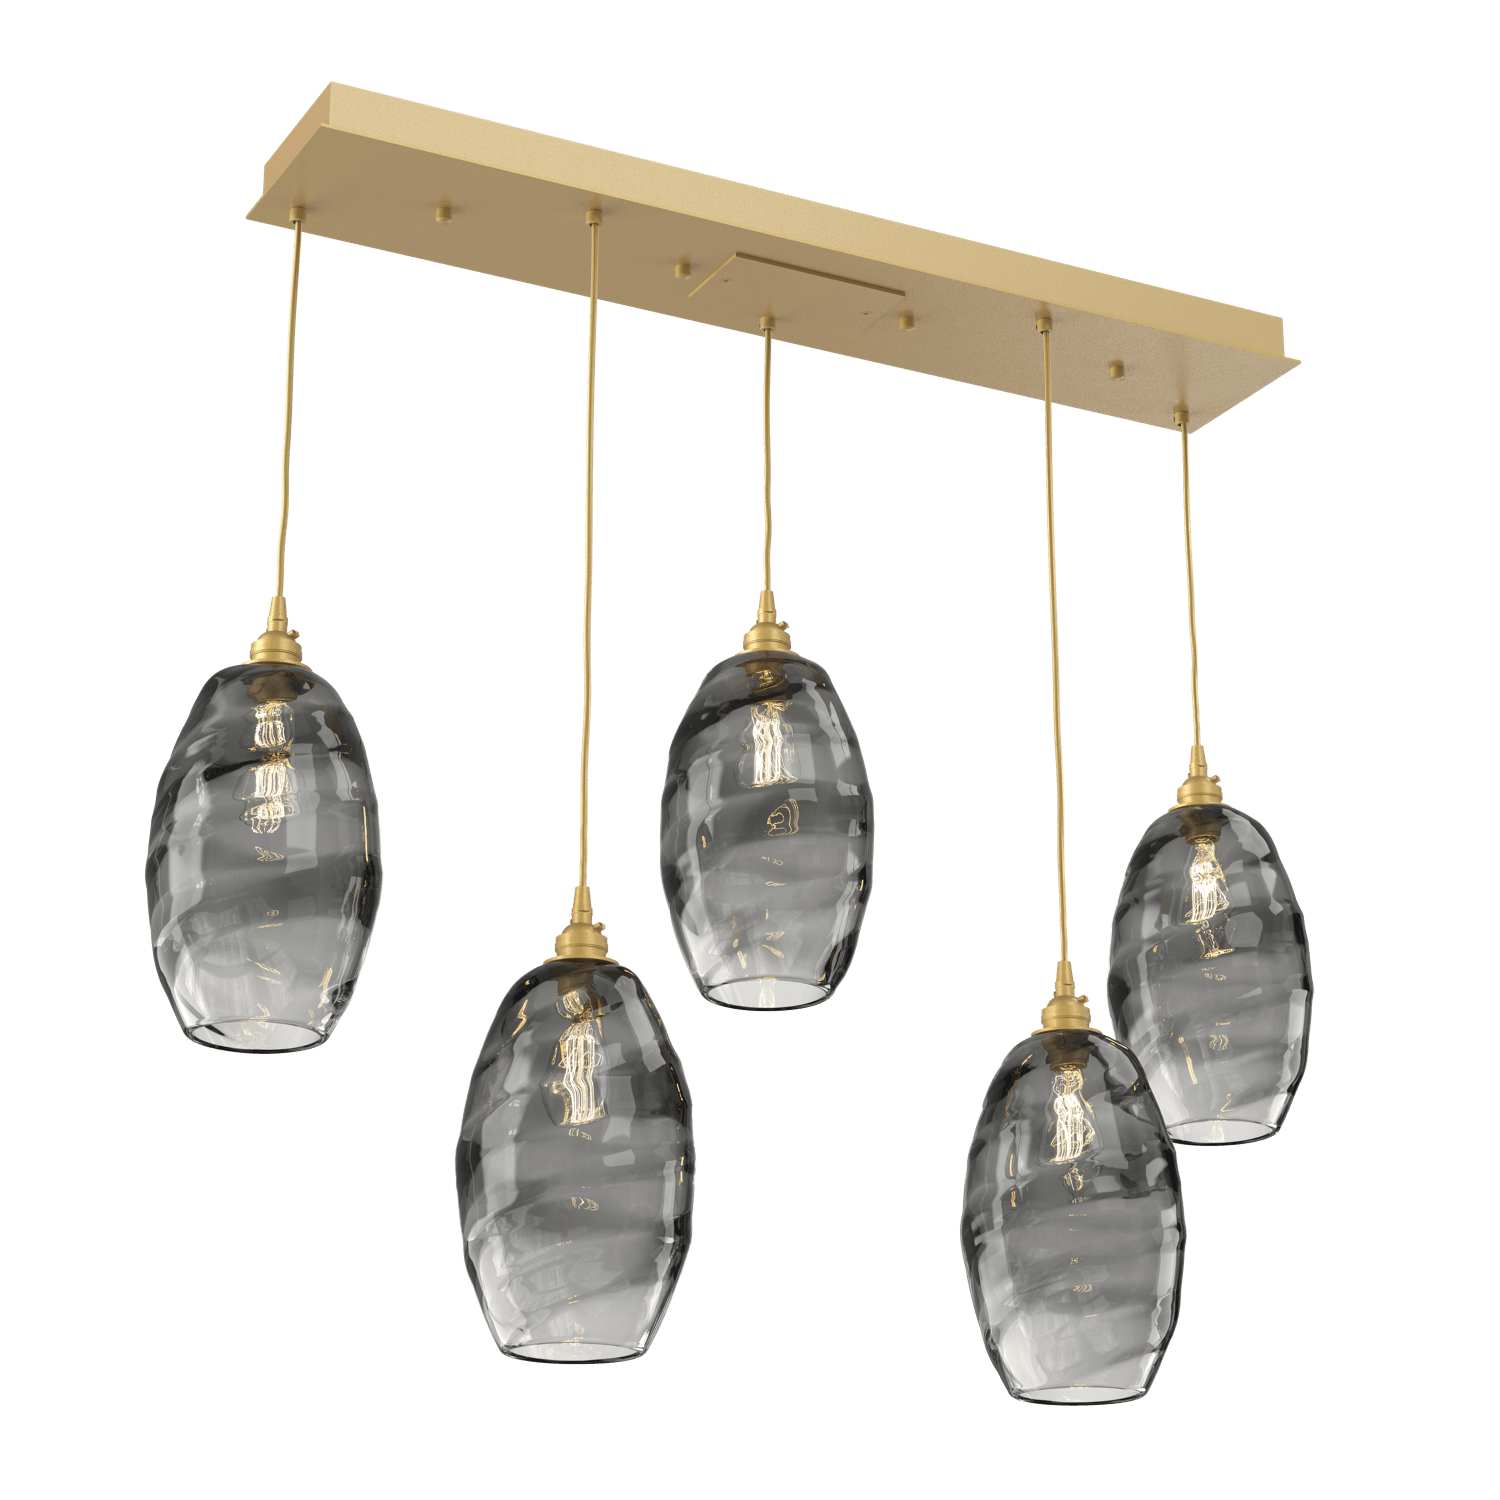 PLB0035-05-GB-OS-Hammerton-Studio-Optic-Blown-Glass-Elisse-5-light-linear-pendant-chandelier-with-gilded-brass-finish-and-optic-smoke-blown-glass-shades-and-incandescent-lamping